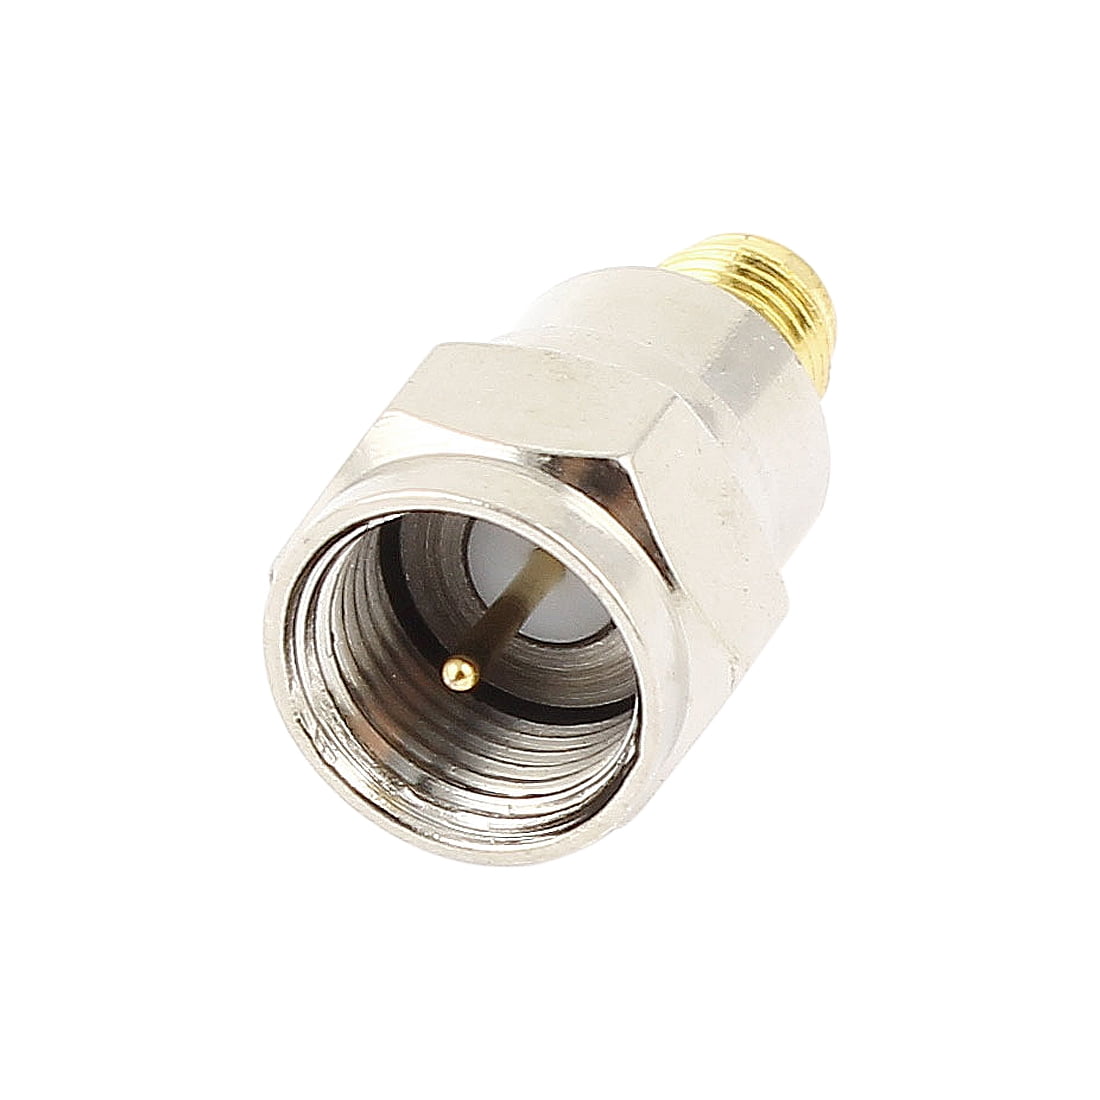 10pcs FME Male Plug to SMA Female Jack Straight RF Coaxial Adapter Connector for sale online